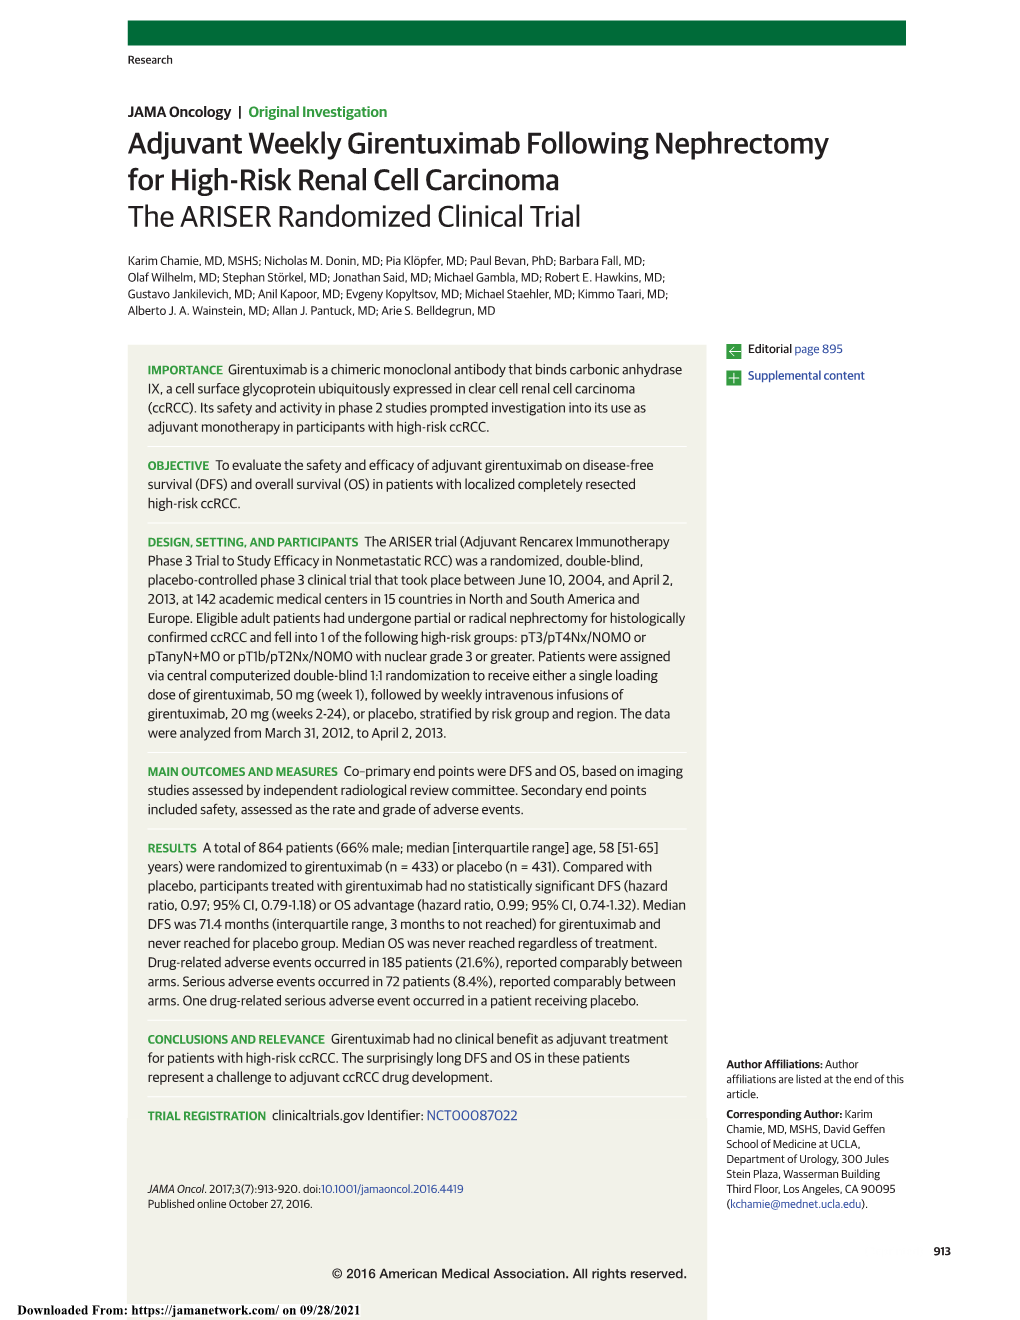 Adjuvant Weekly Girentuximab Following Nephrectomy for High-Risk Renal Cell Carcinoma the ARISER Randomized Clinical Trial